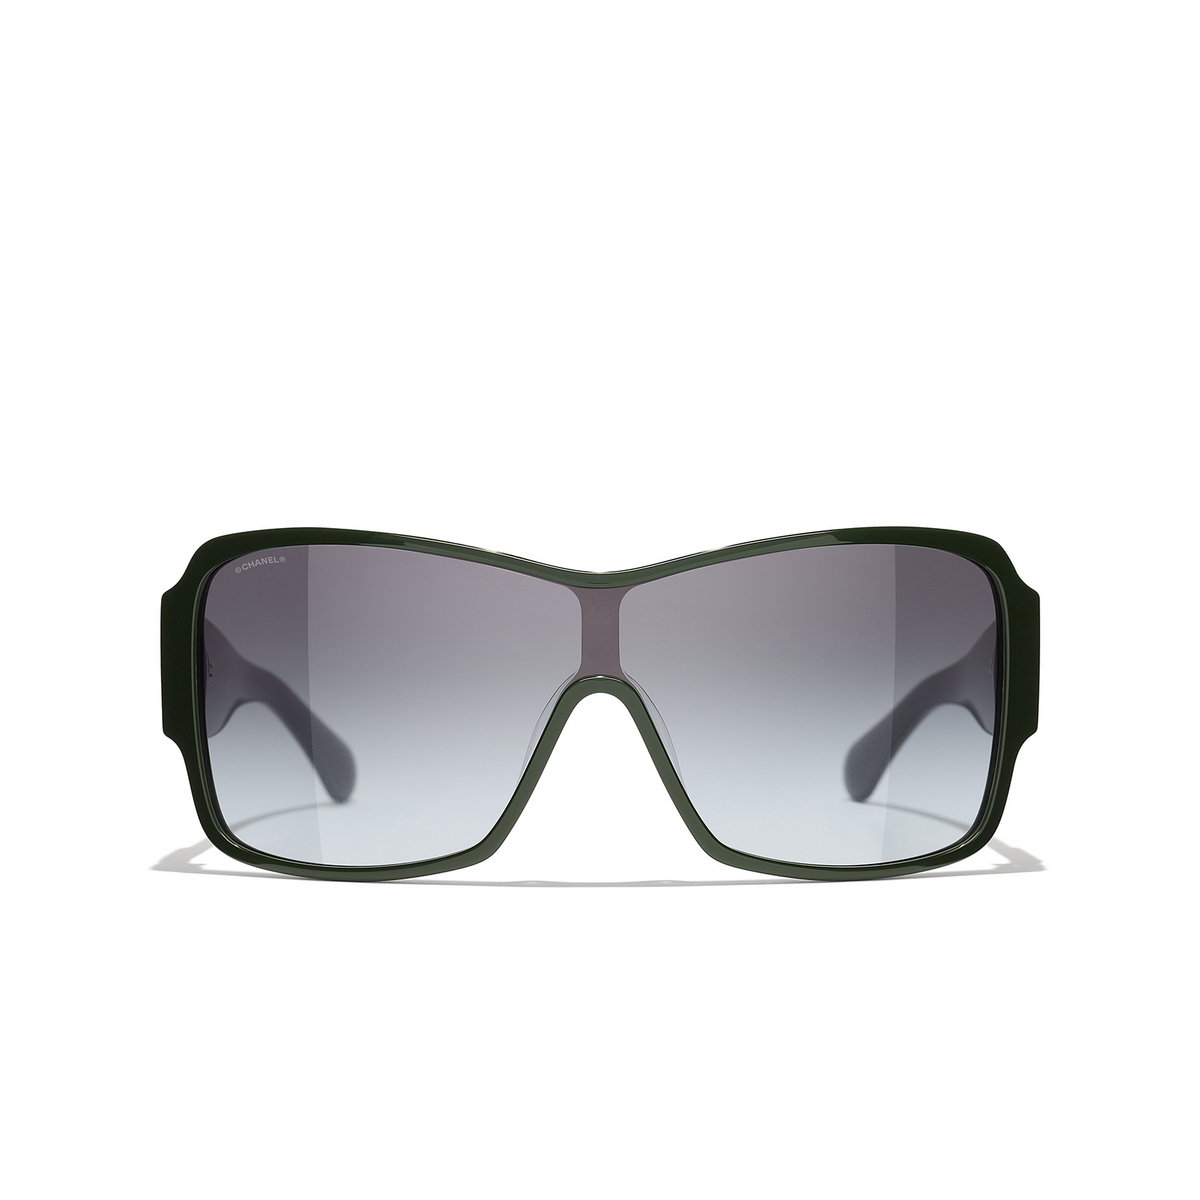 CHANEL shield Sunglasses 1228S6 Green - front view